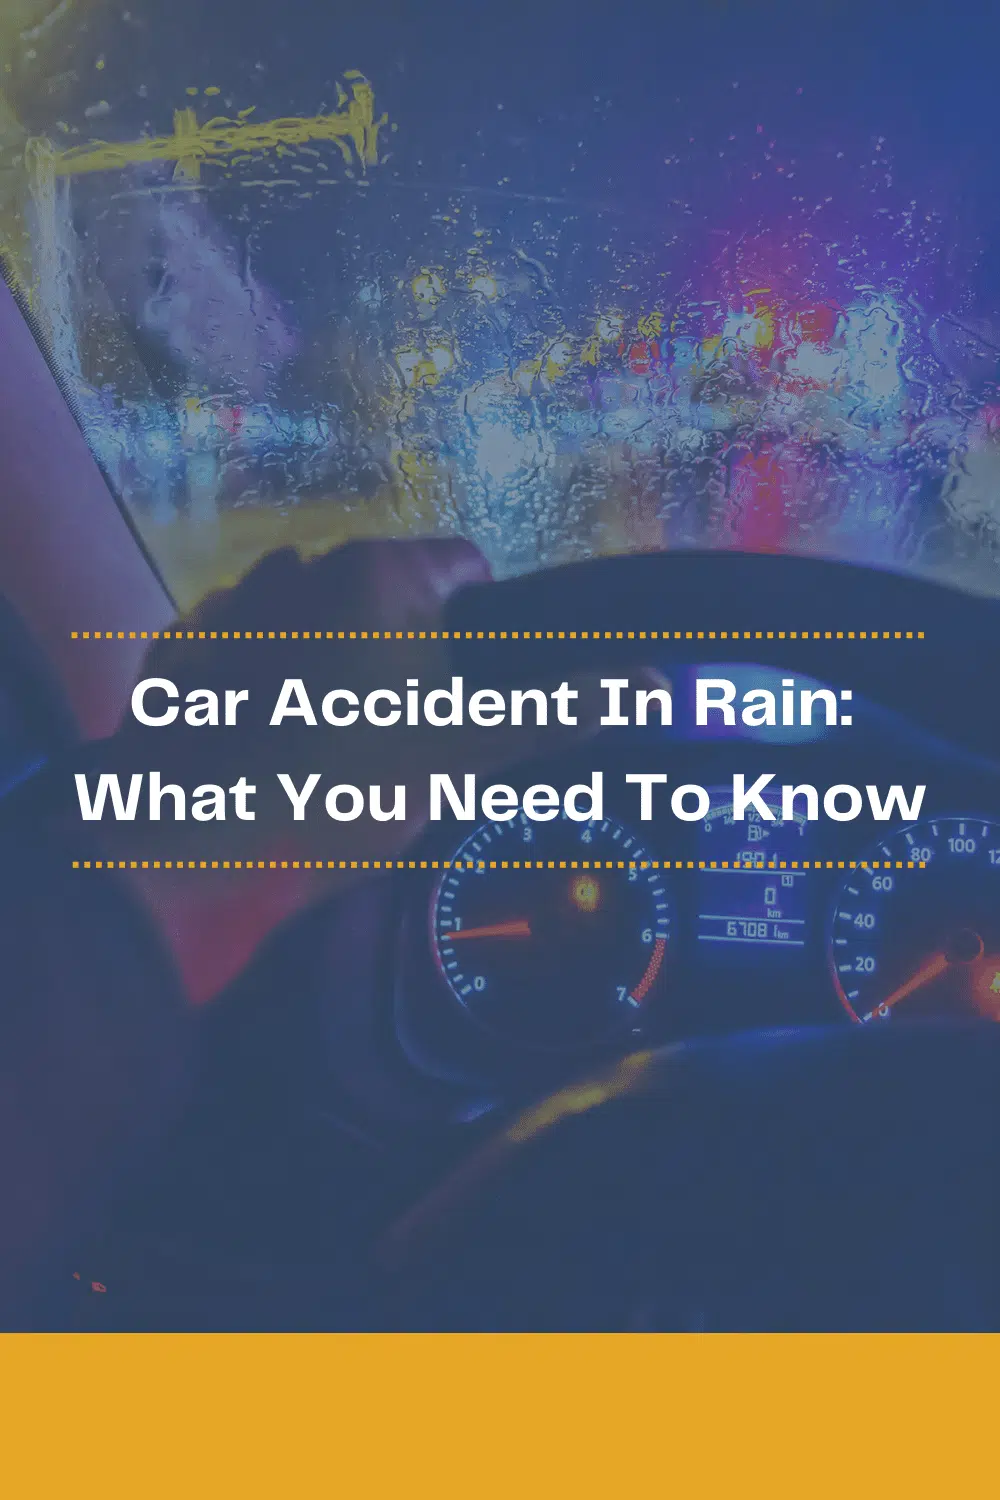 Car Accident In Rain: What You Need To Know